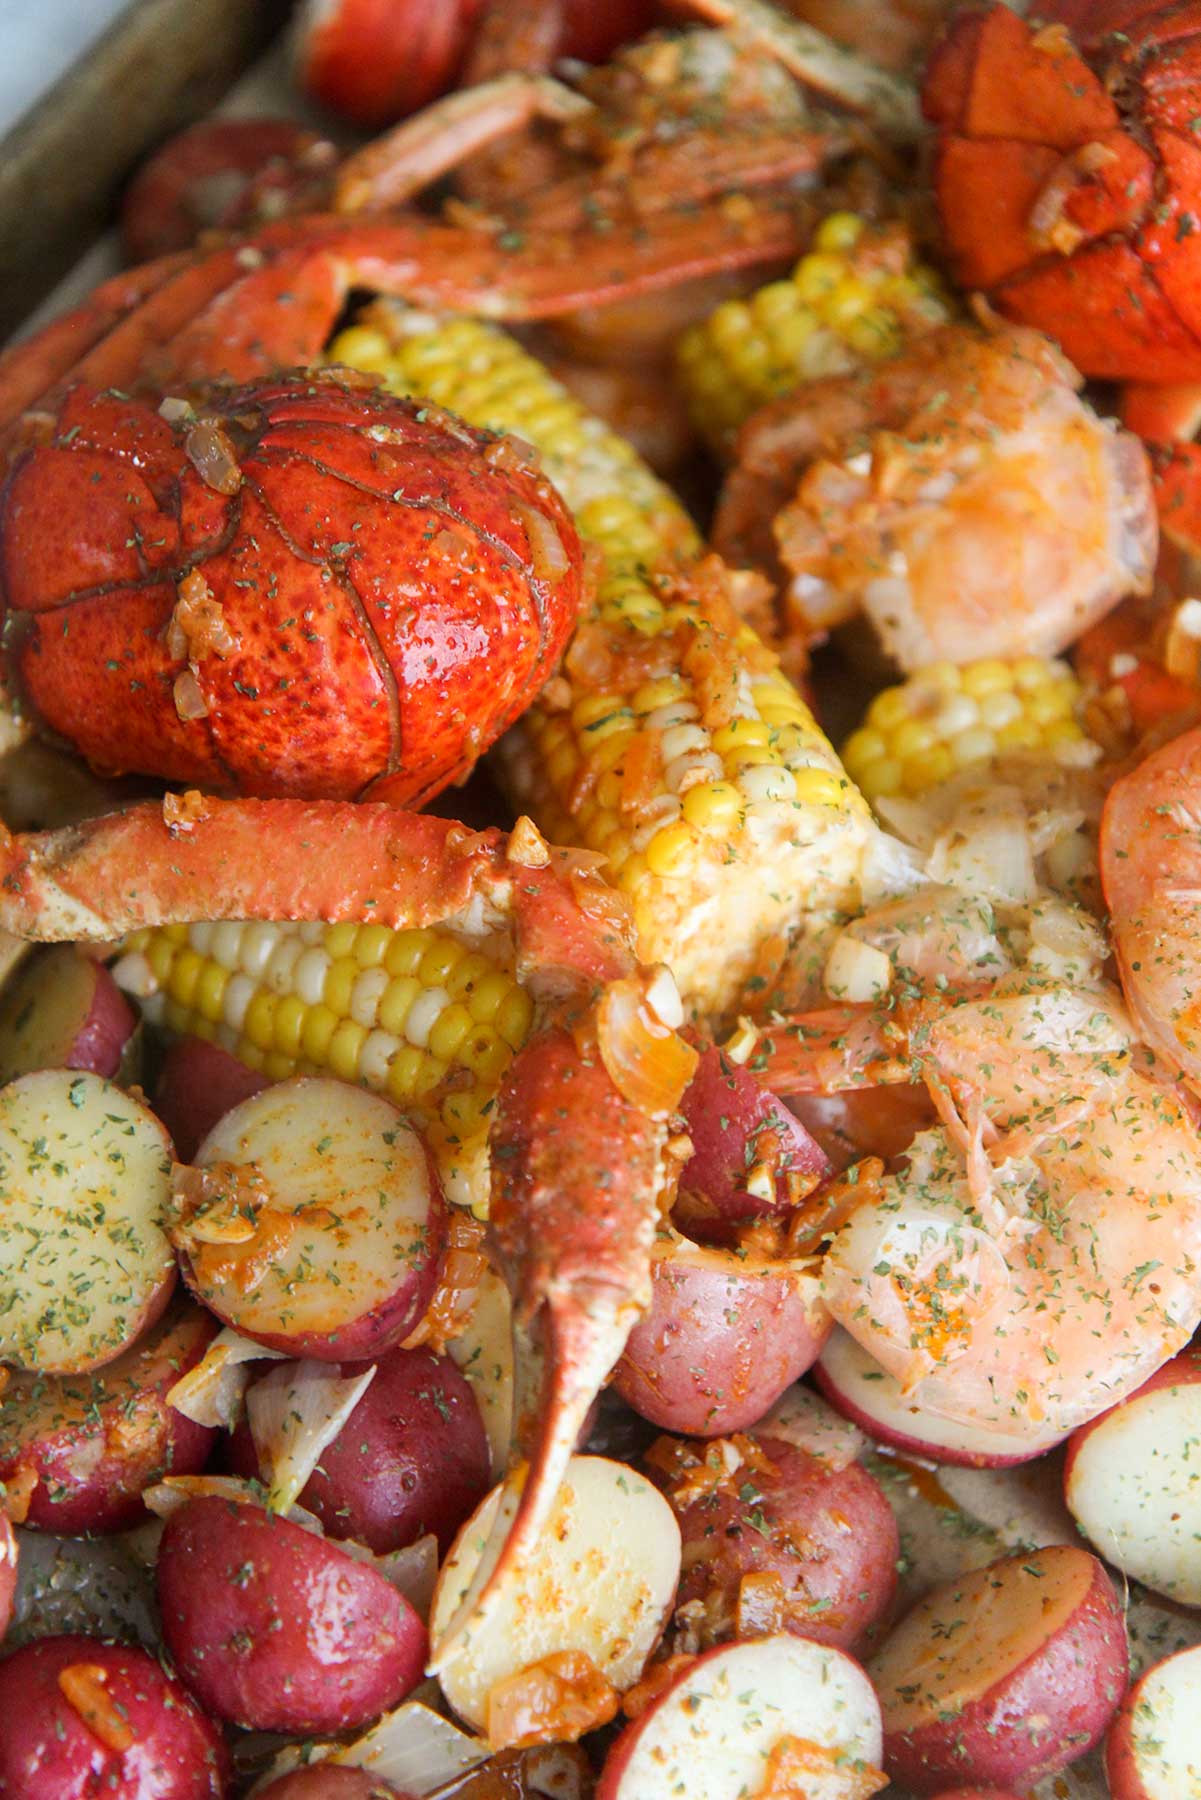 https://www.cookedbyjulie.com/wp-content/uploads/2021/05/seafood-boil-one.jpg